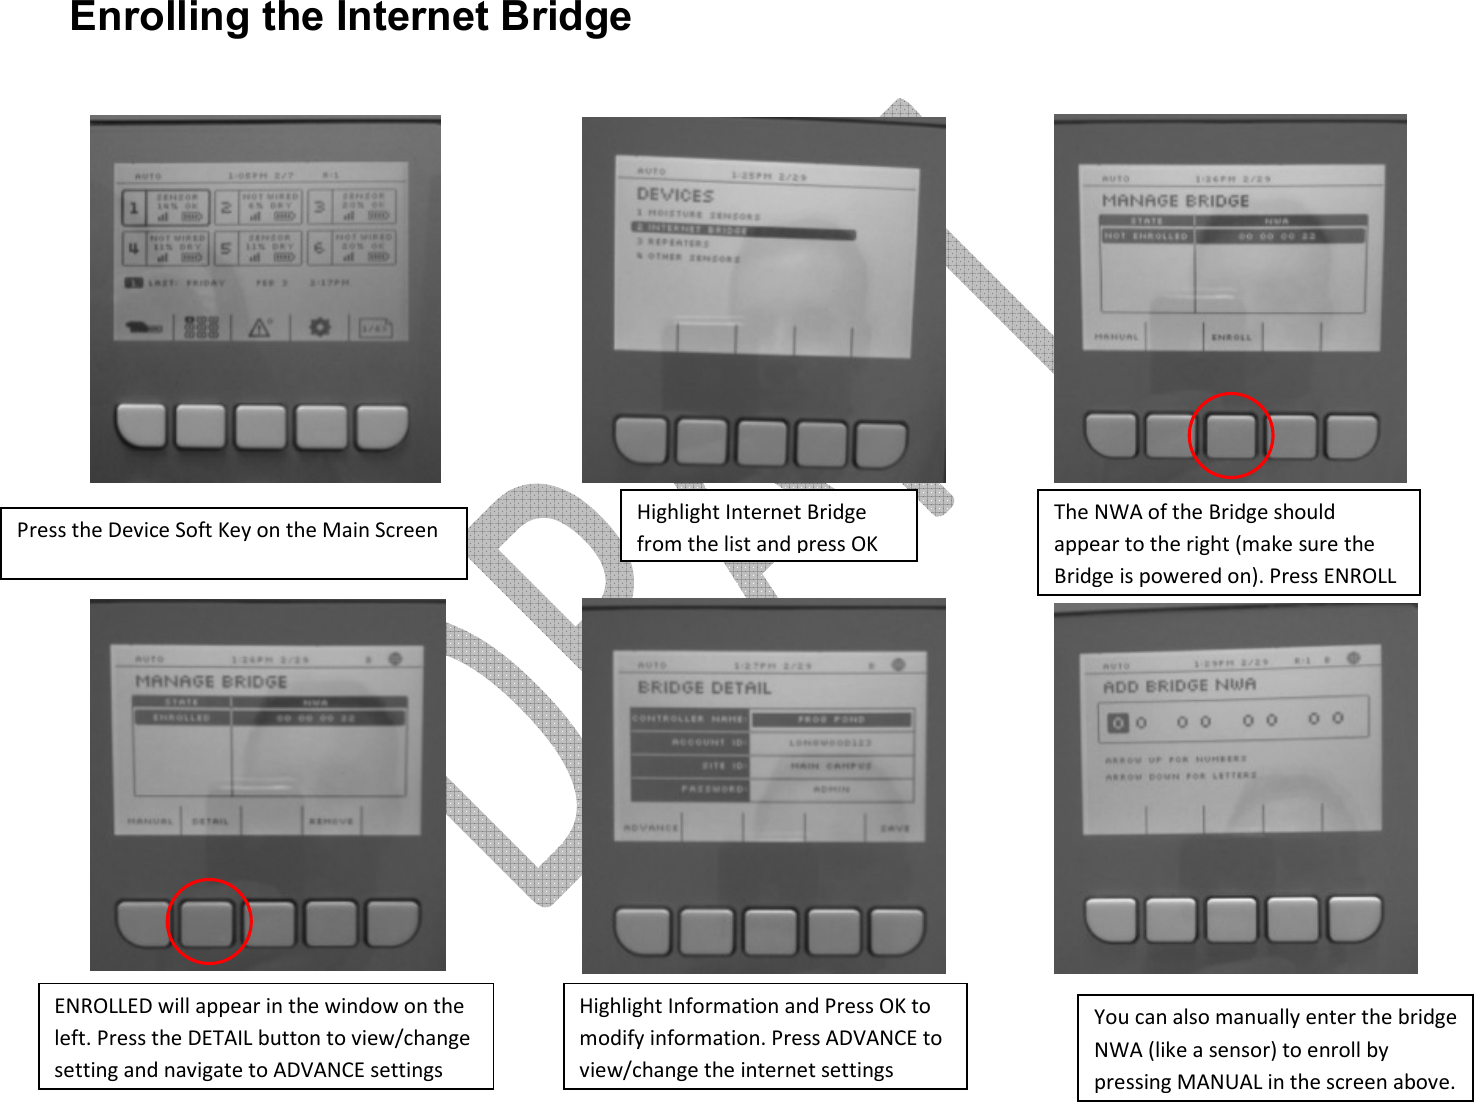     Enrolling the Internet Bridge Press the Device Soft Key on the Main Screen Highlight Internet Bridge from the list and press OK The NWA of the Bridge should appear to the right (make sure the Bridge is powered on). Press ENROLL ENROLLED will appear in the window on the left. Press the DETAIL button to view/change setting and navigate to ADVANCE settings You can also manually enter the bridge NWA (like a sensor) to enroll by pressing MANUAL in the screen above. Highlight Information and Press OK to modify information. Press ADVANCE to view/change the internet settings 